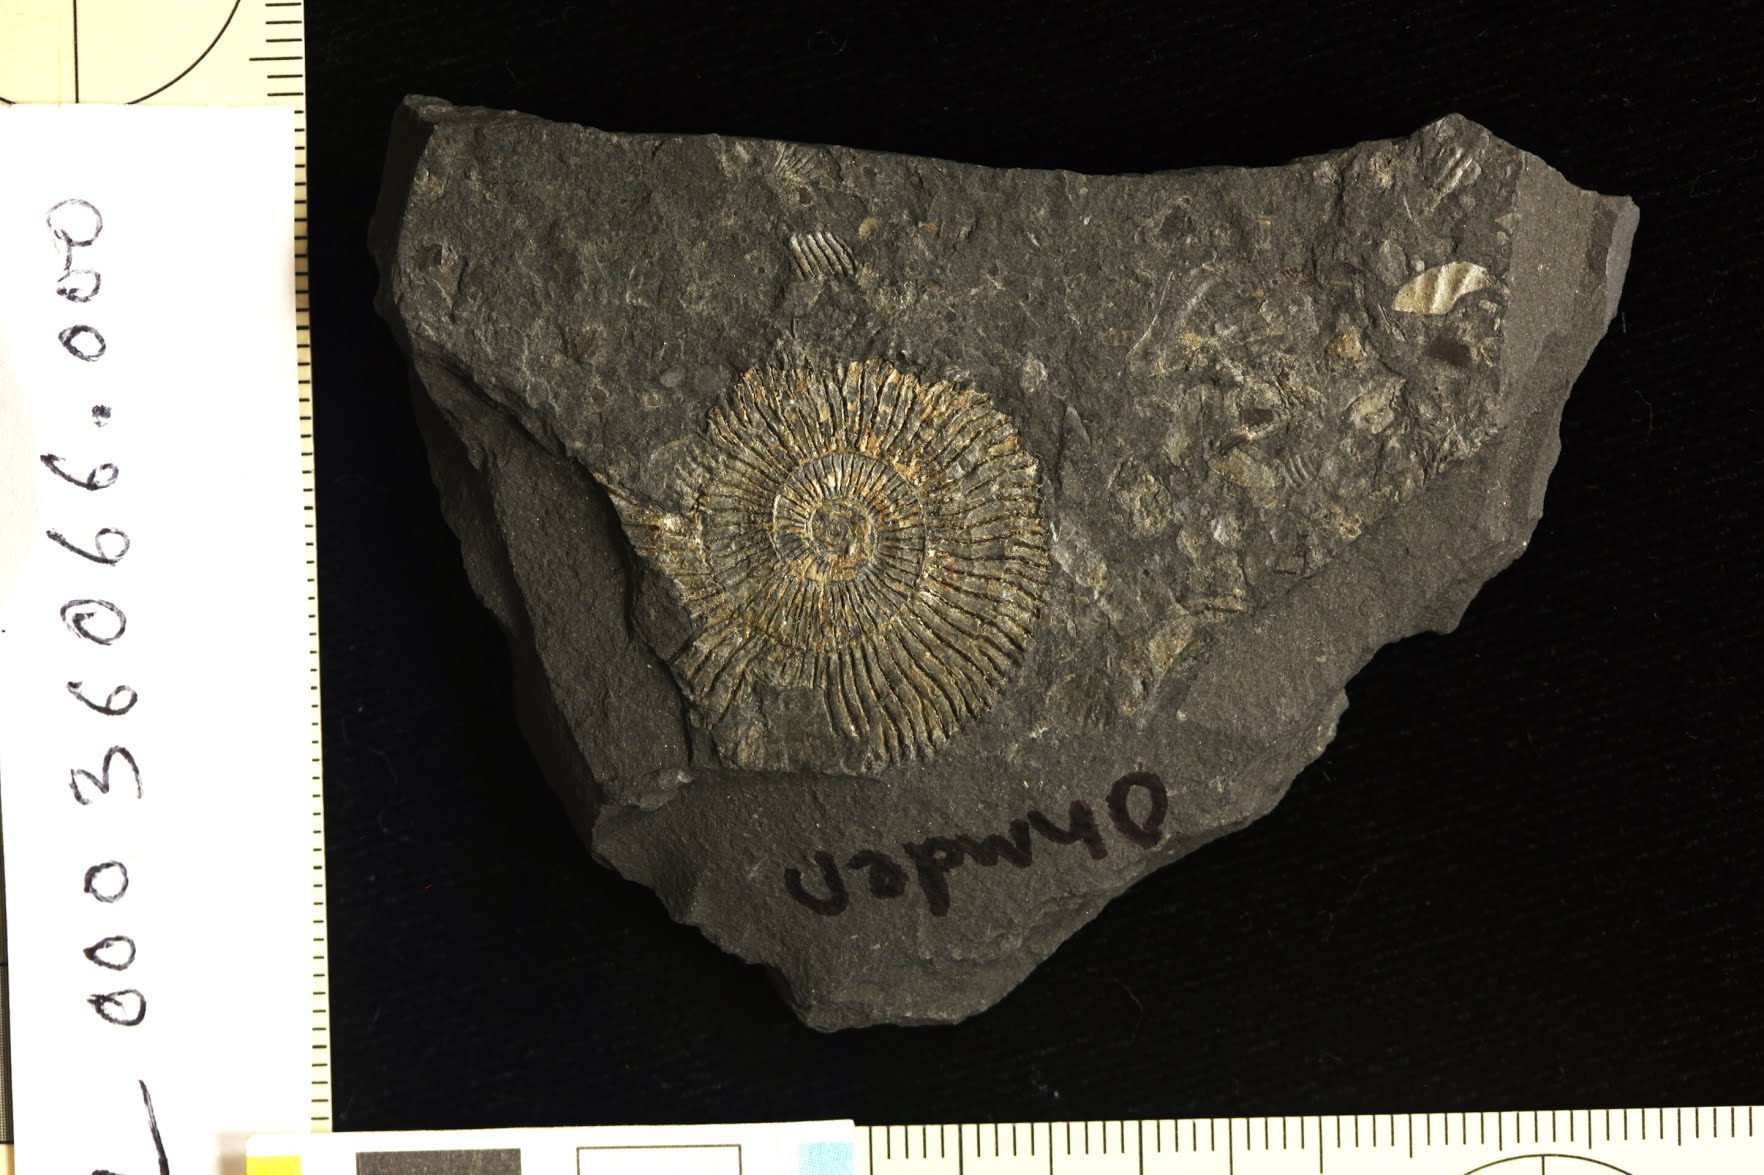 Ammonite fossil From the Ohmden quarry, Posidonia shale lagerstatte.